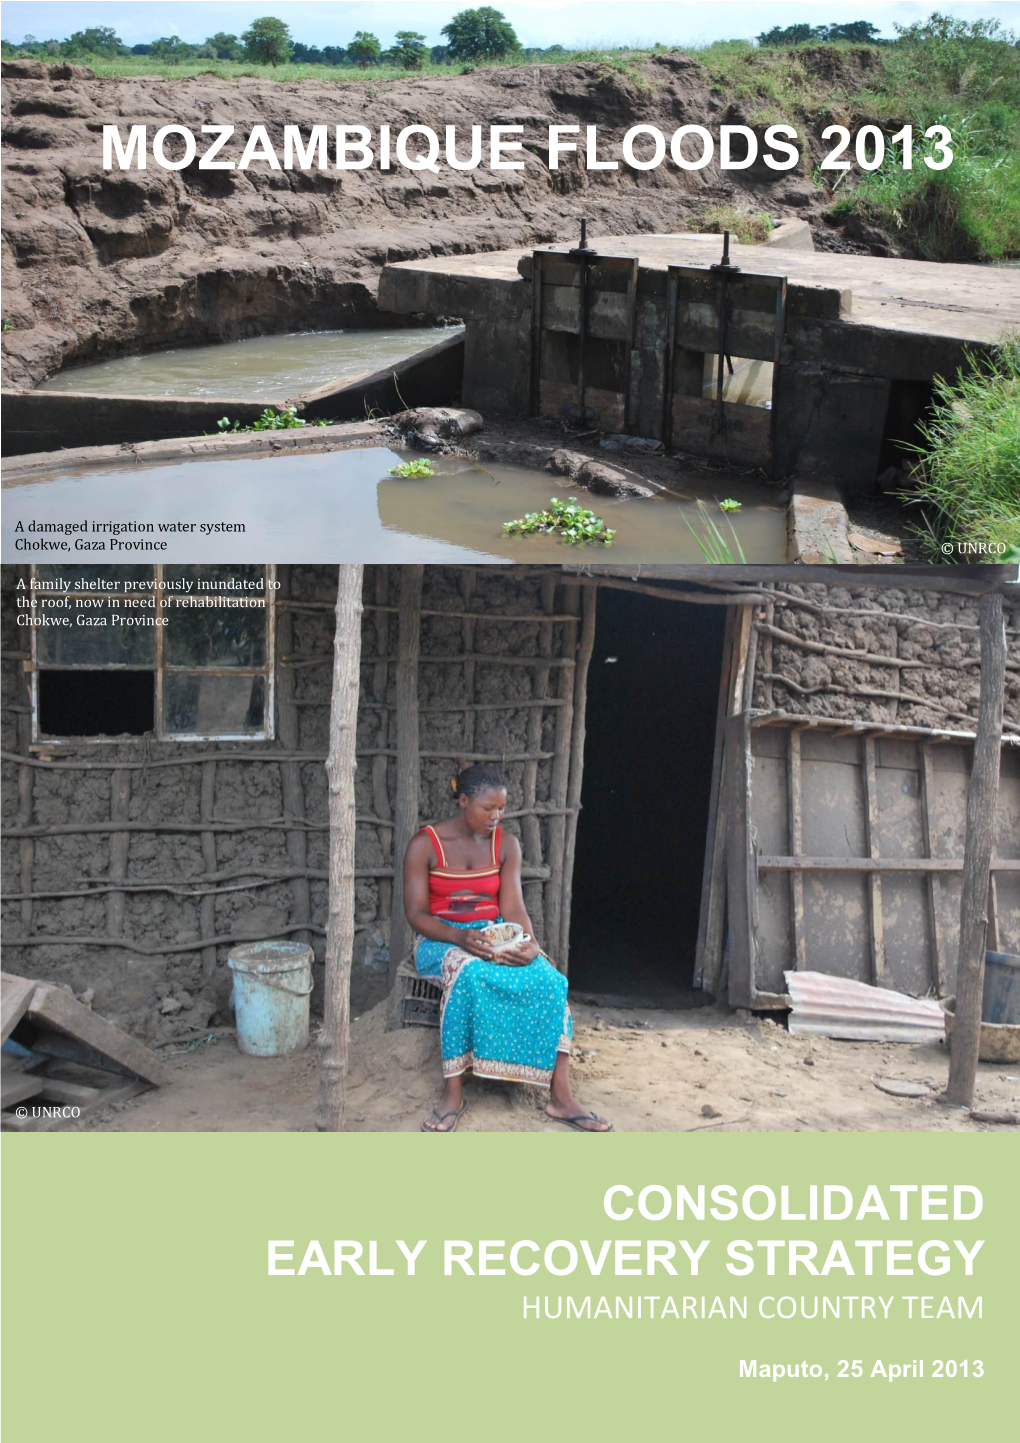 Mozambique Floods 2013 – Consolidated Early Recovery Strategy